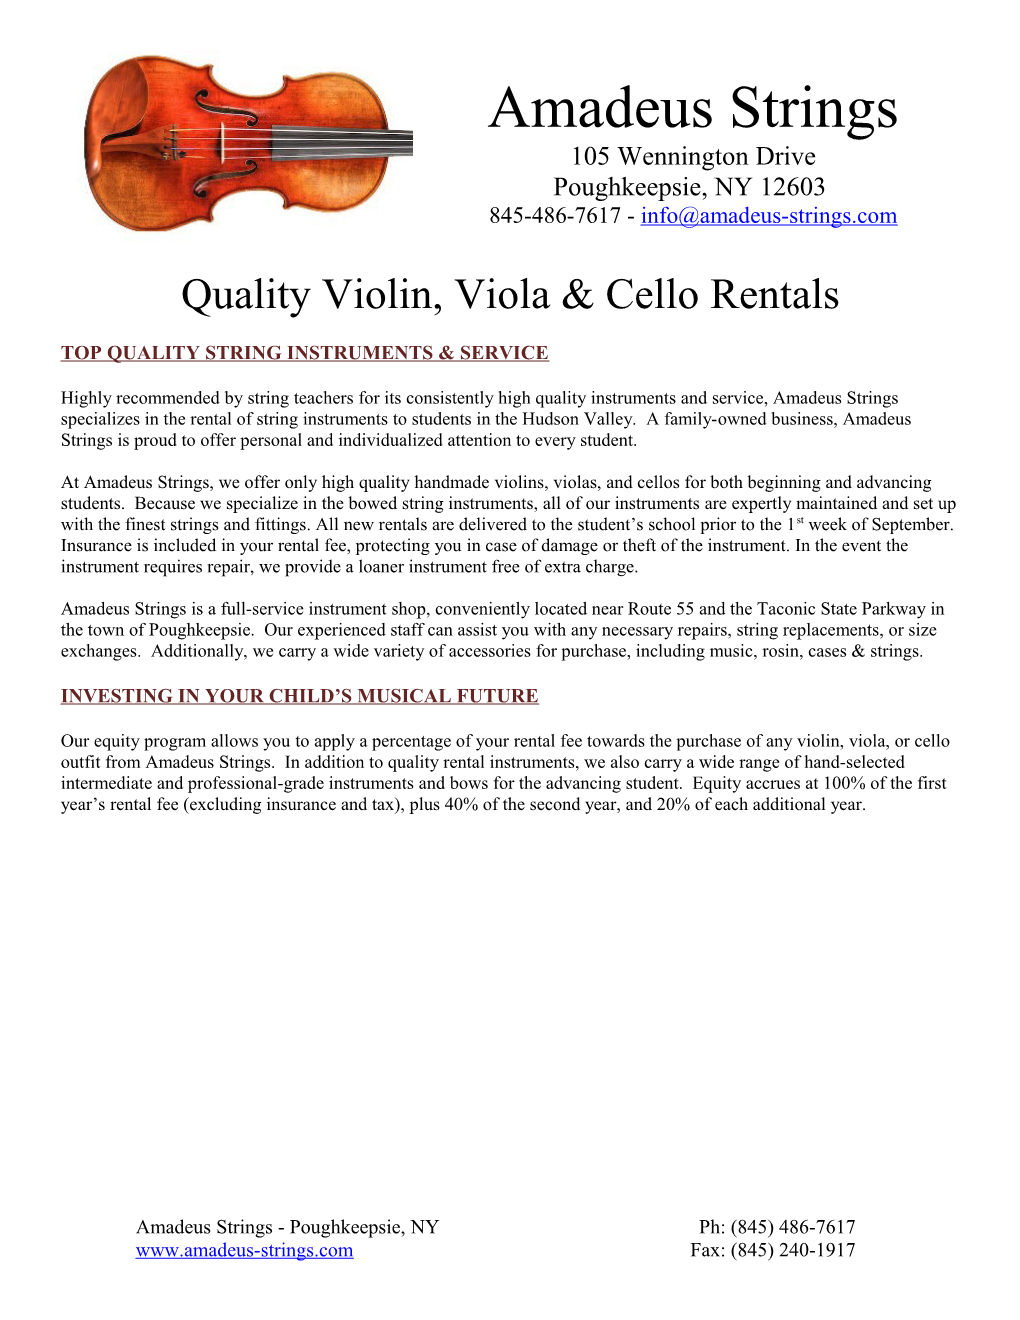 Top Quality String Instruments & Service s1